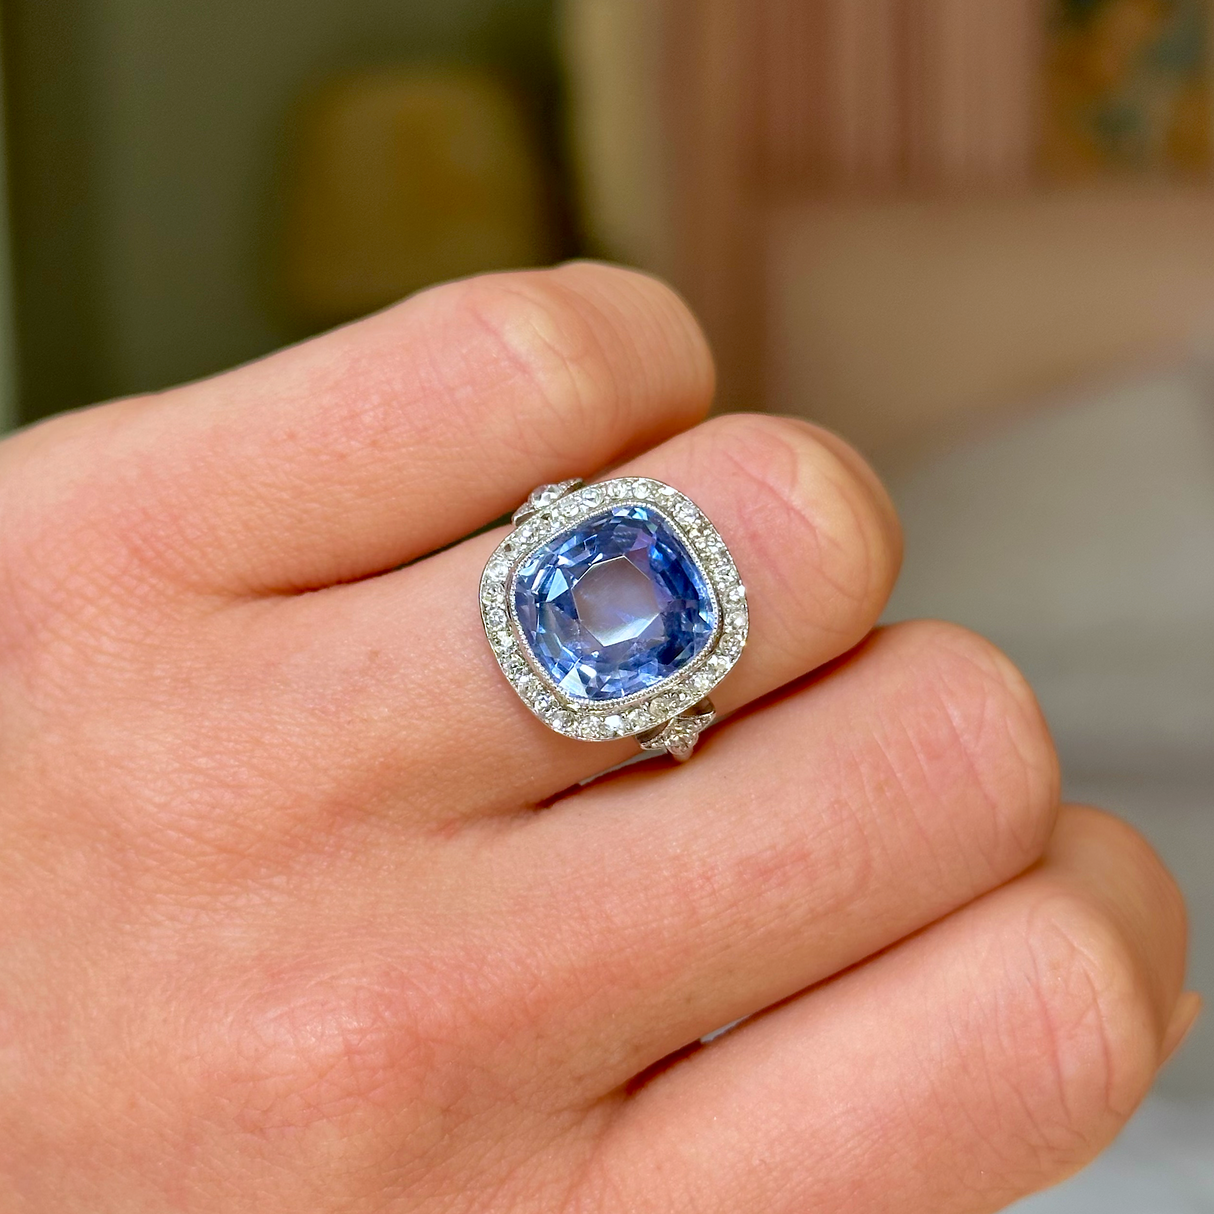 Antique, Belle Époque Sapphire and Diamond Cluster Ring, 18ct White Gold worn on closed hand.